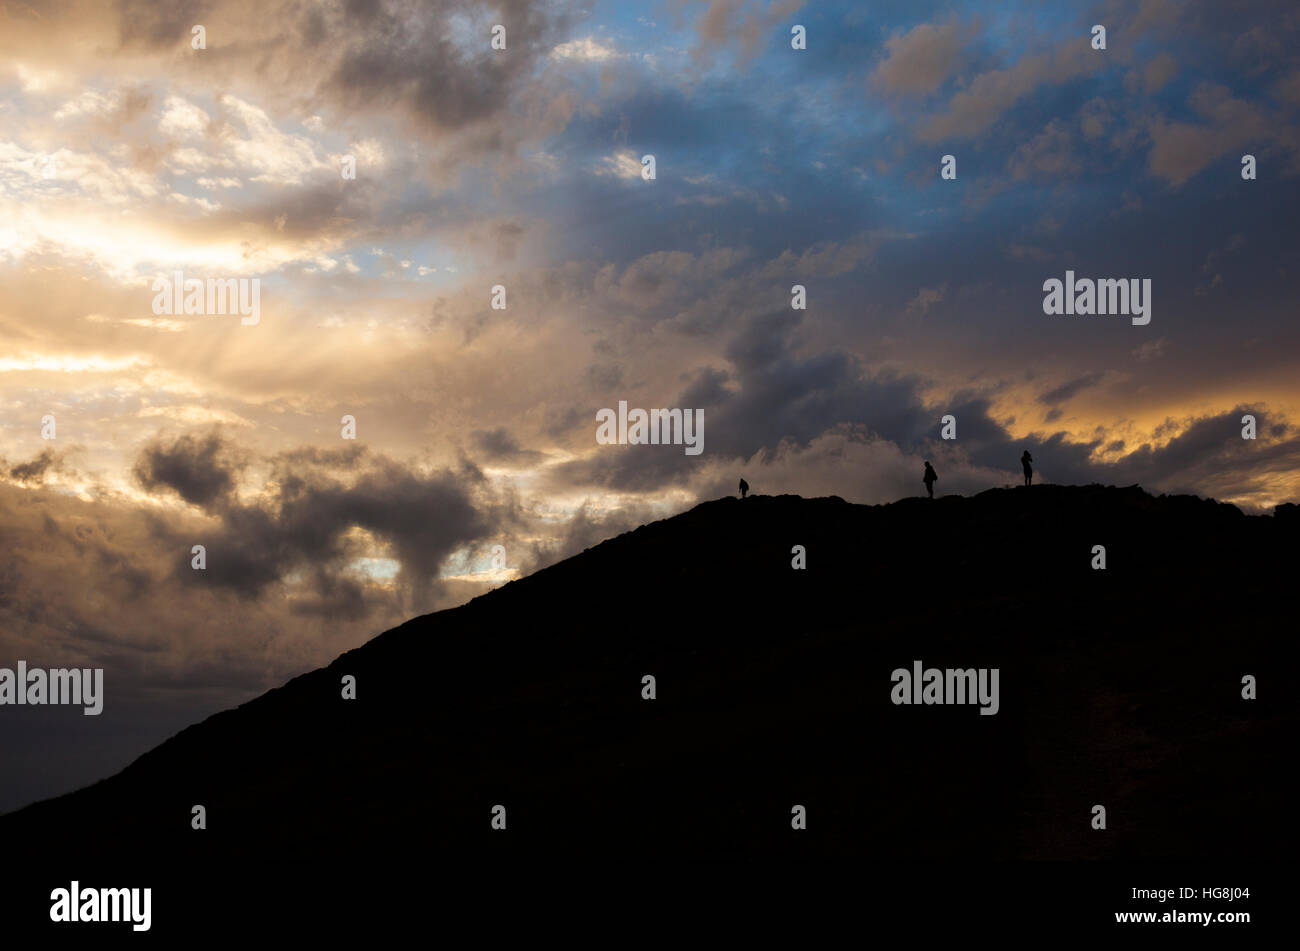 Dramatic silhouette of 3 mountain climbers on the top of a mountain with dramatic cloudy sunset sky. Stock Photo